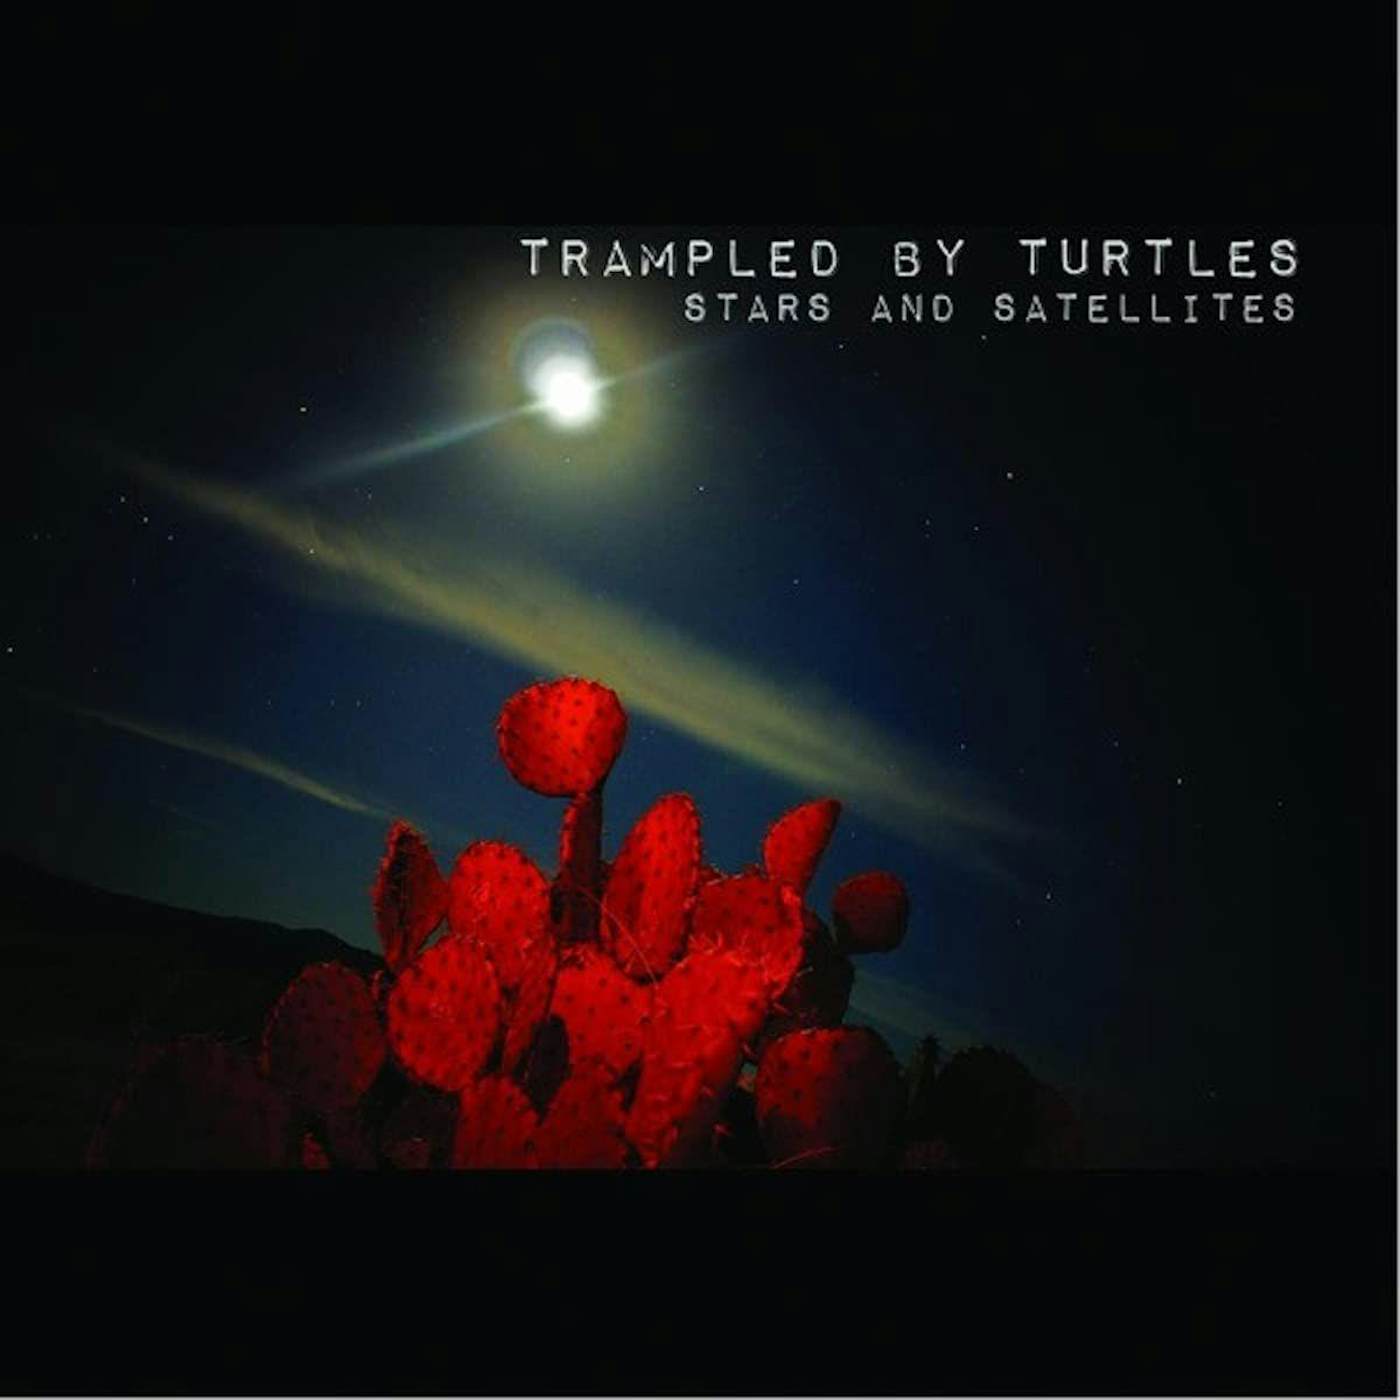 Trampled by Turtles Stars And Satellites (10 Year Anniversary) [Limited Edition Red LP + Bonus Orange Flexi Disc] Vinyl Record